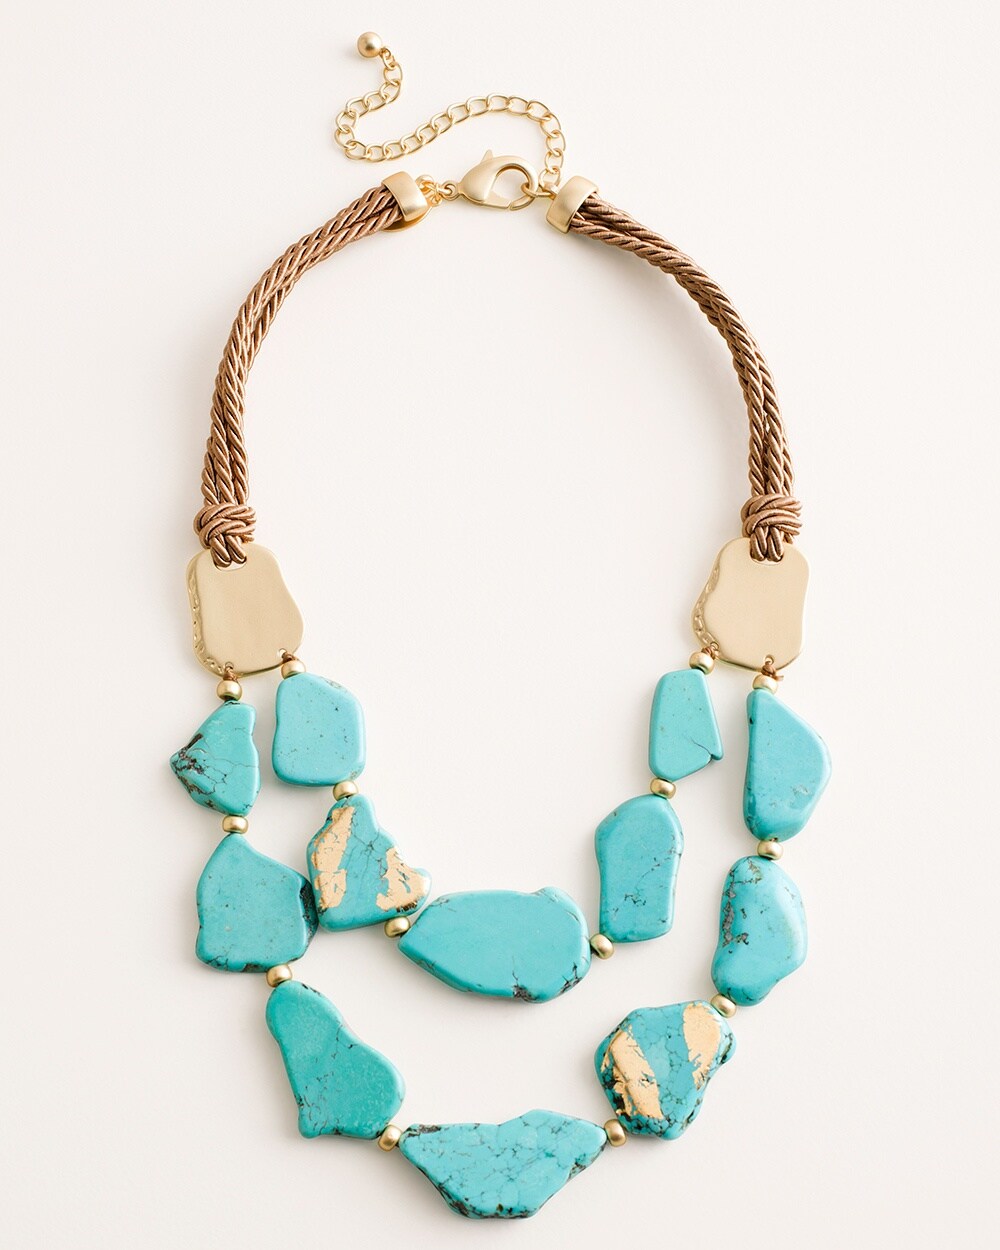 Buy Turquoise Necklace Set Online - Accessorize India